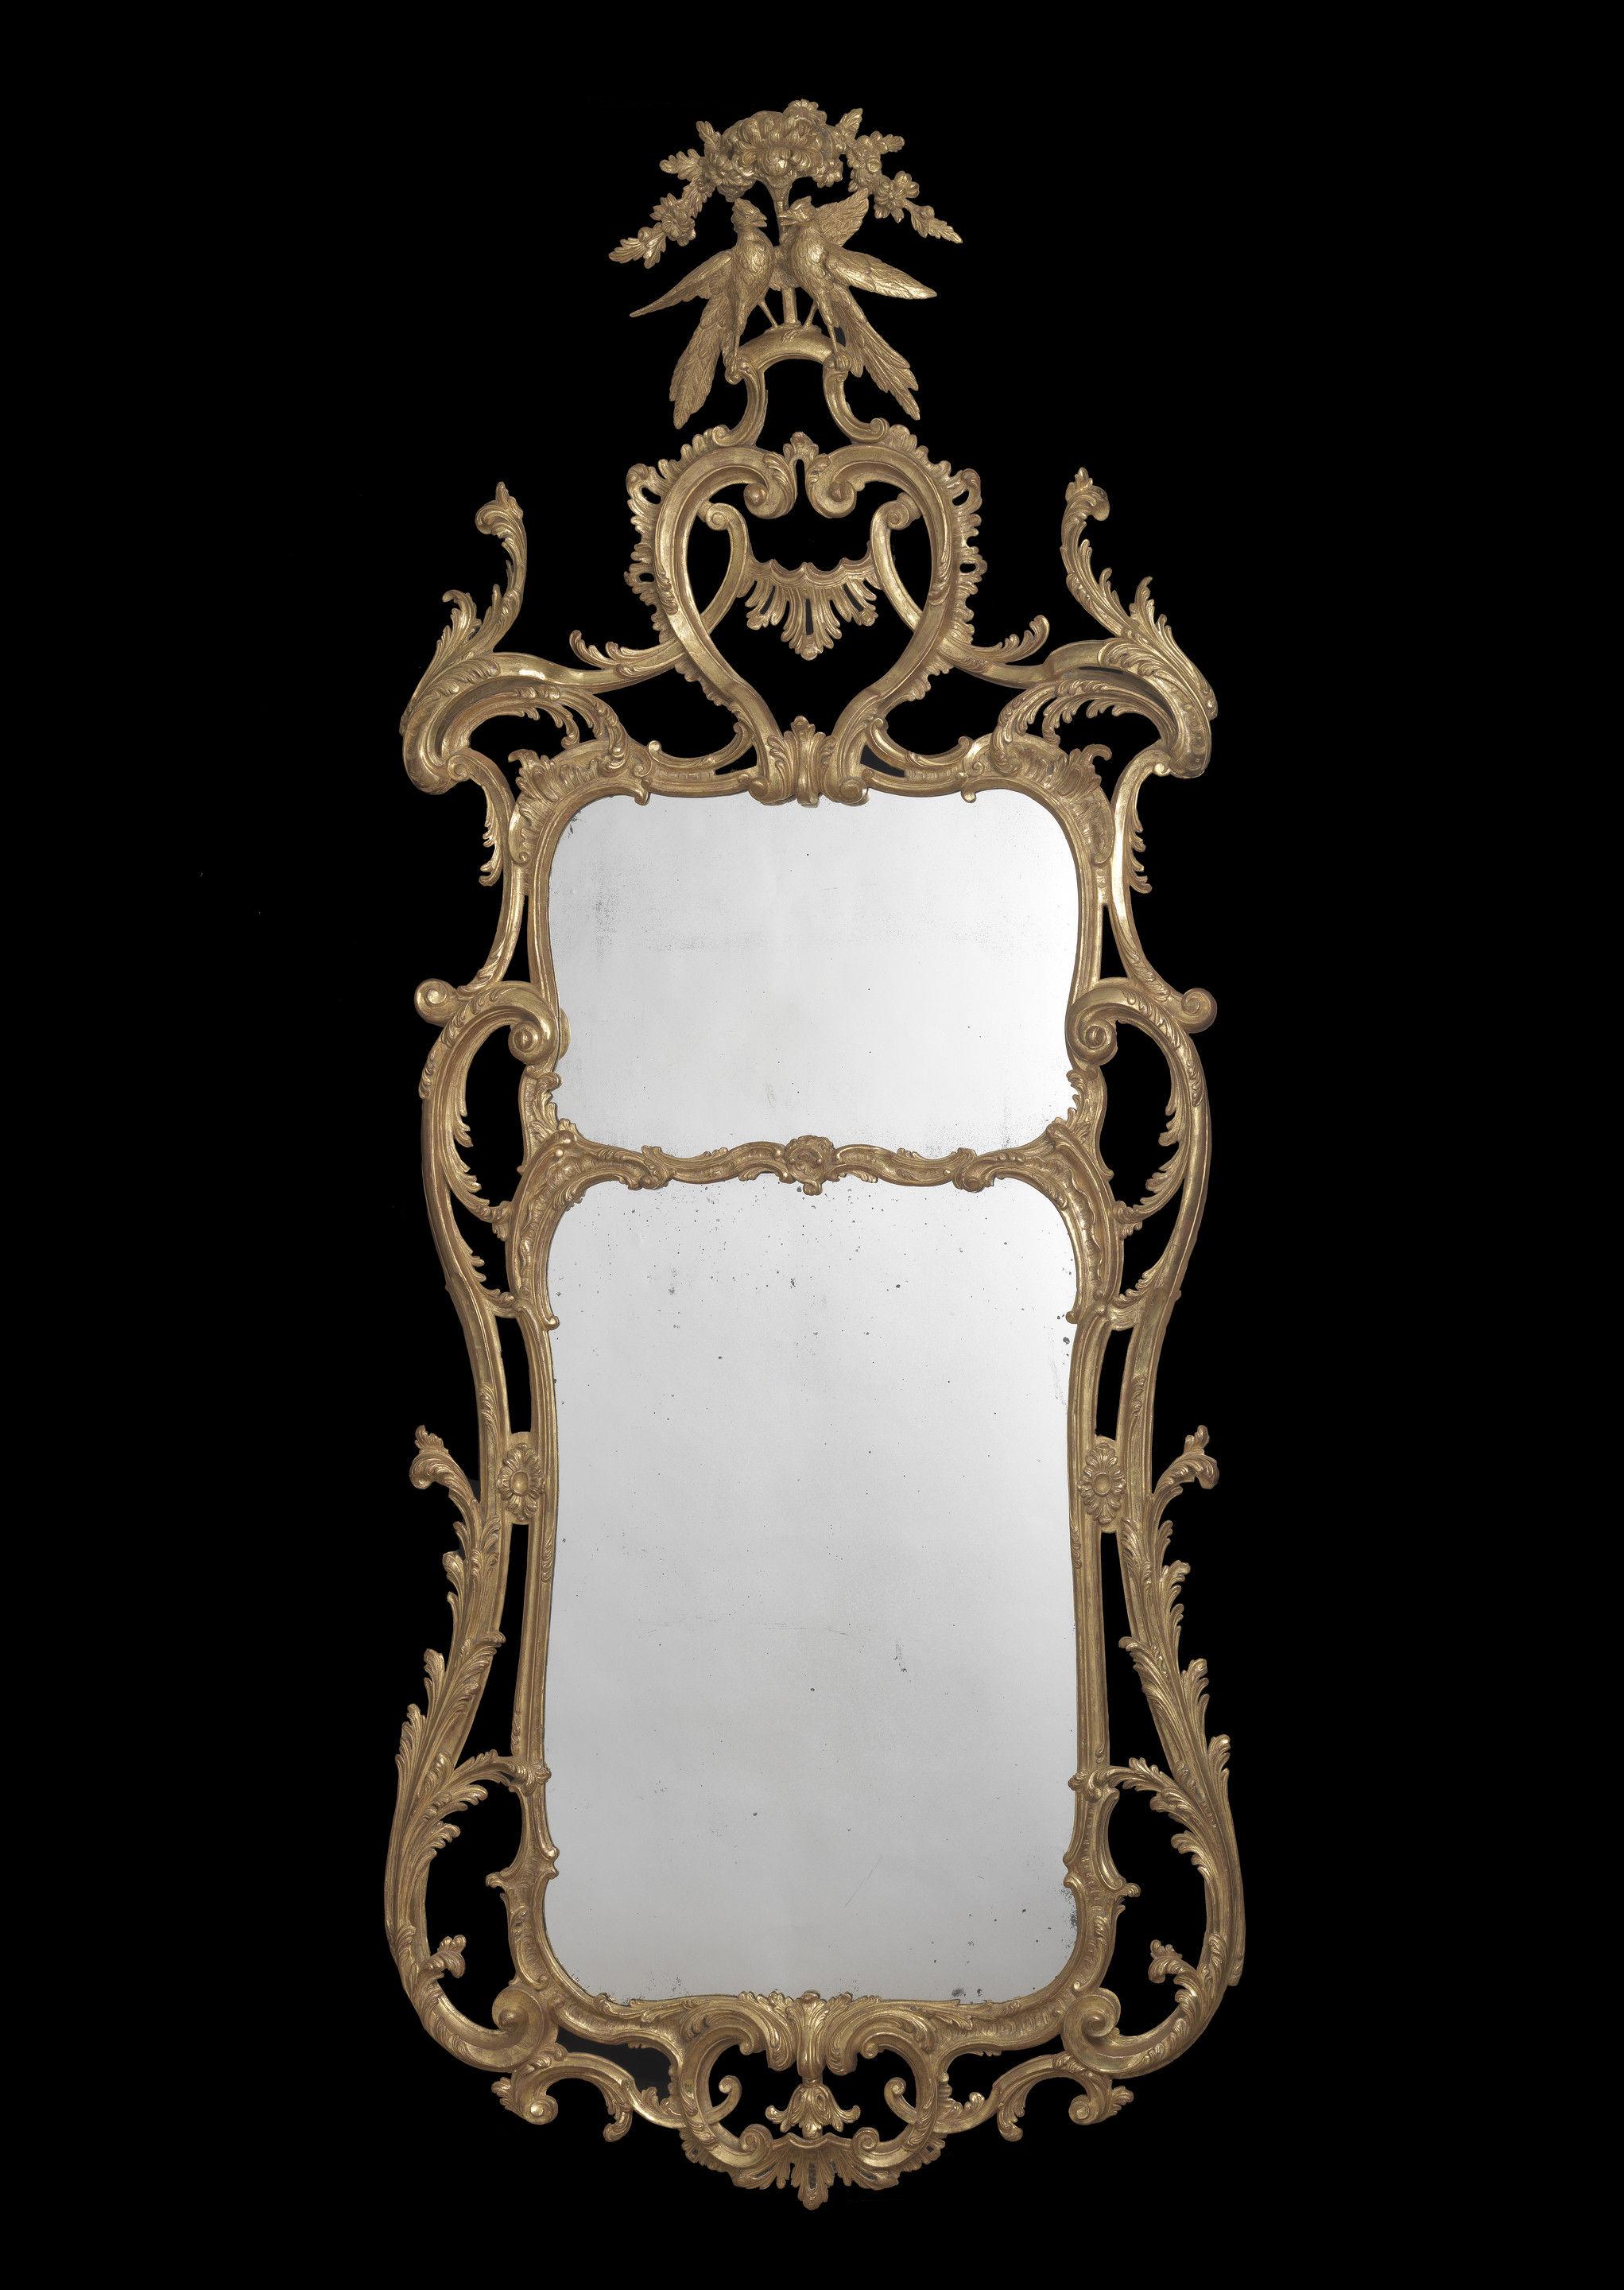 Each with a shaped rectangular divided plate within a scrolling foliate-carved frame, the cresting carved with confronting C-scrolls and rockwork, surmounted by a pair of billing birds and flowerheads.

Provenance:
Almost certainly supplied to